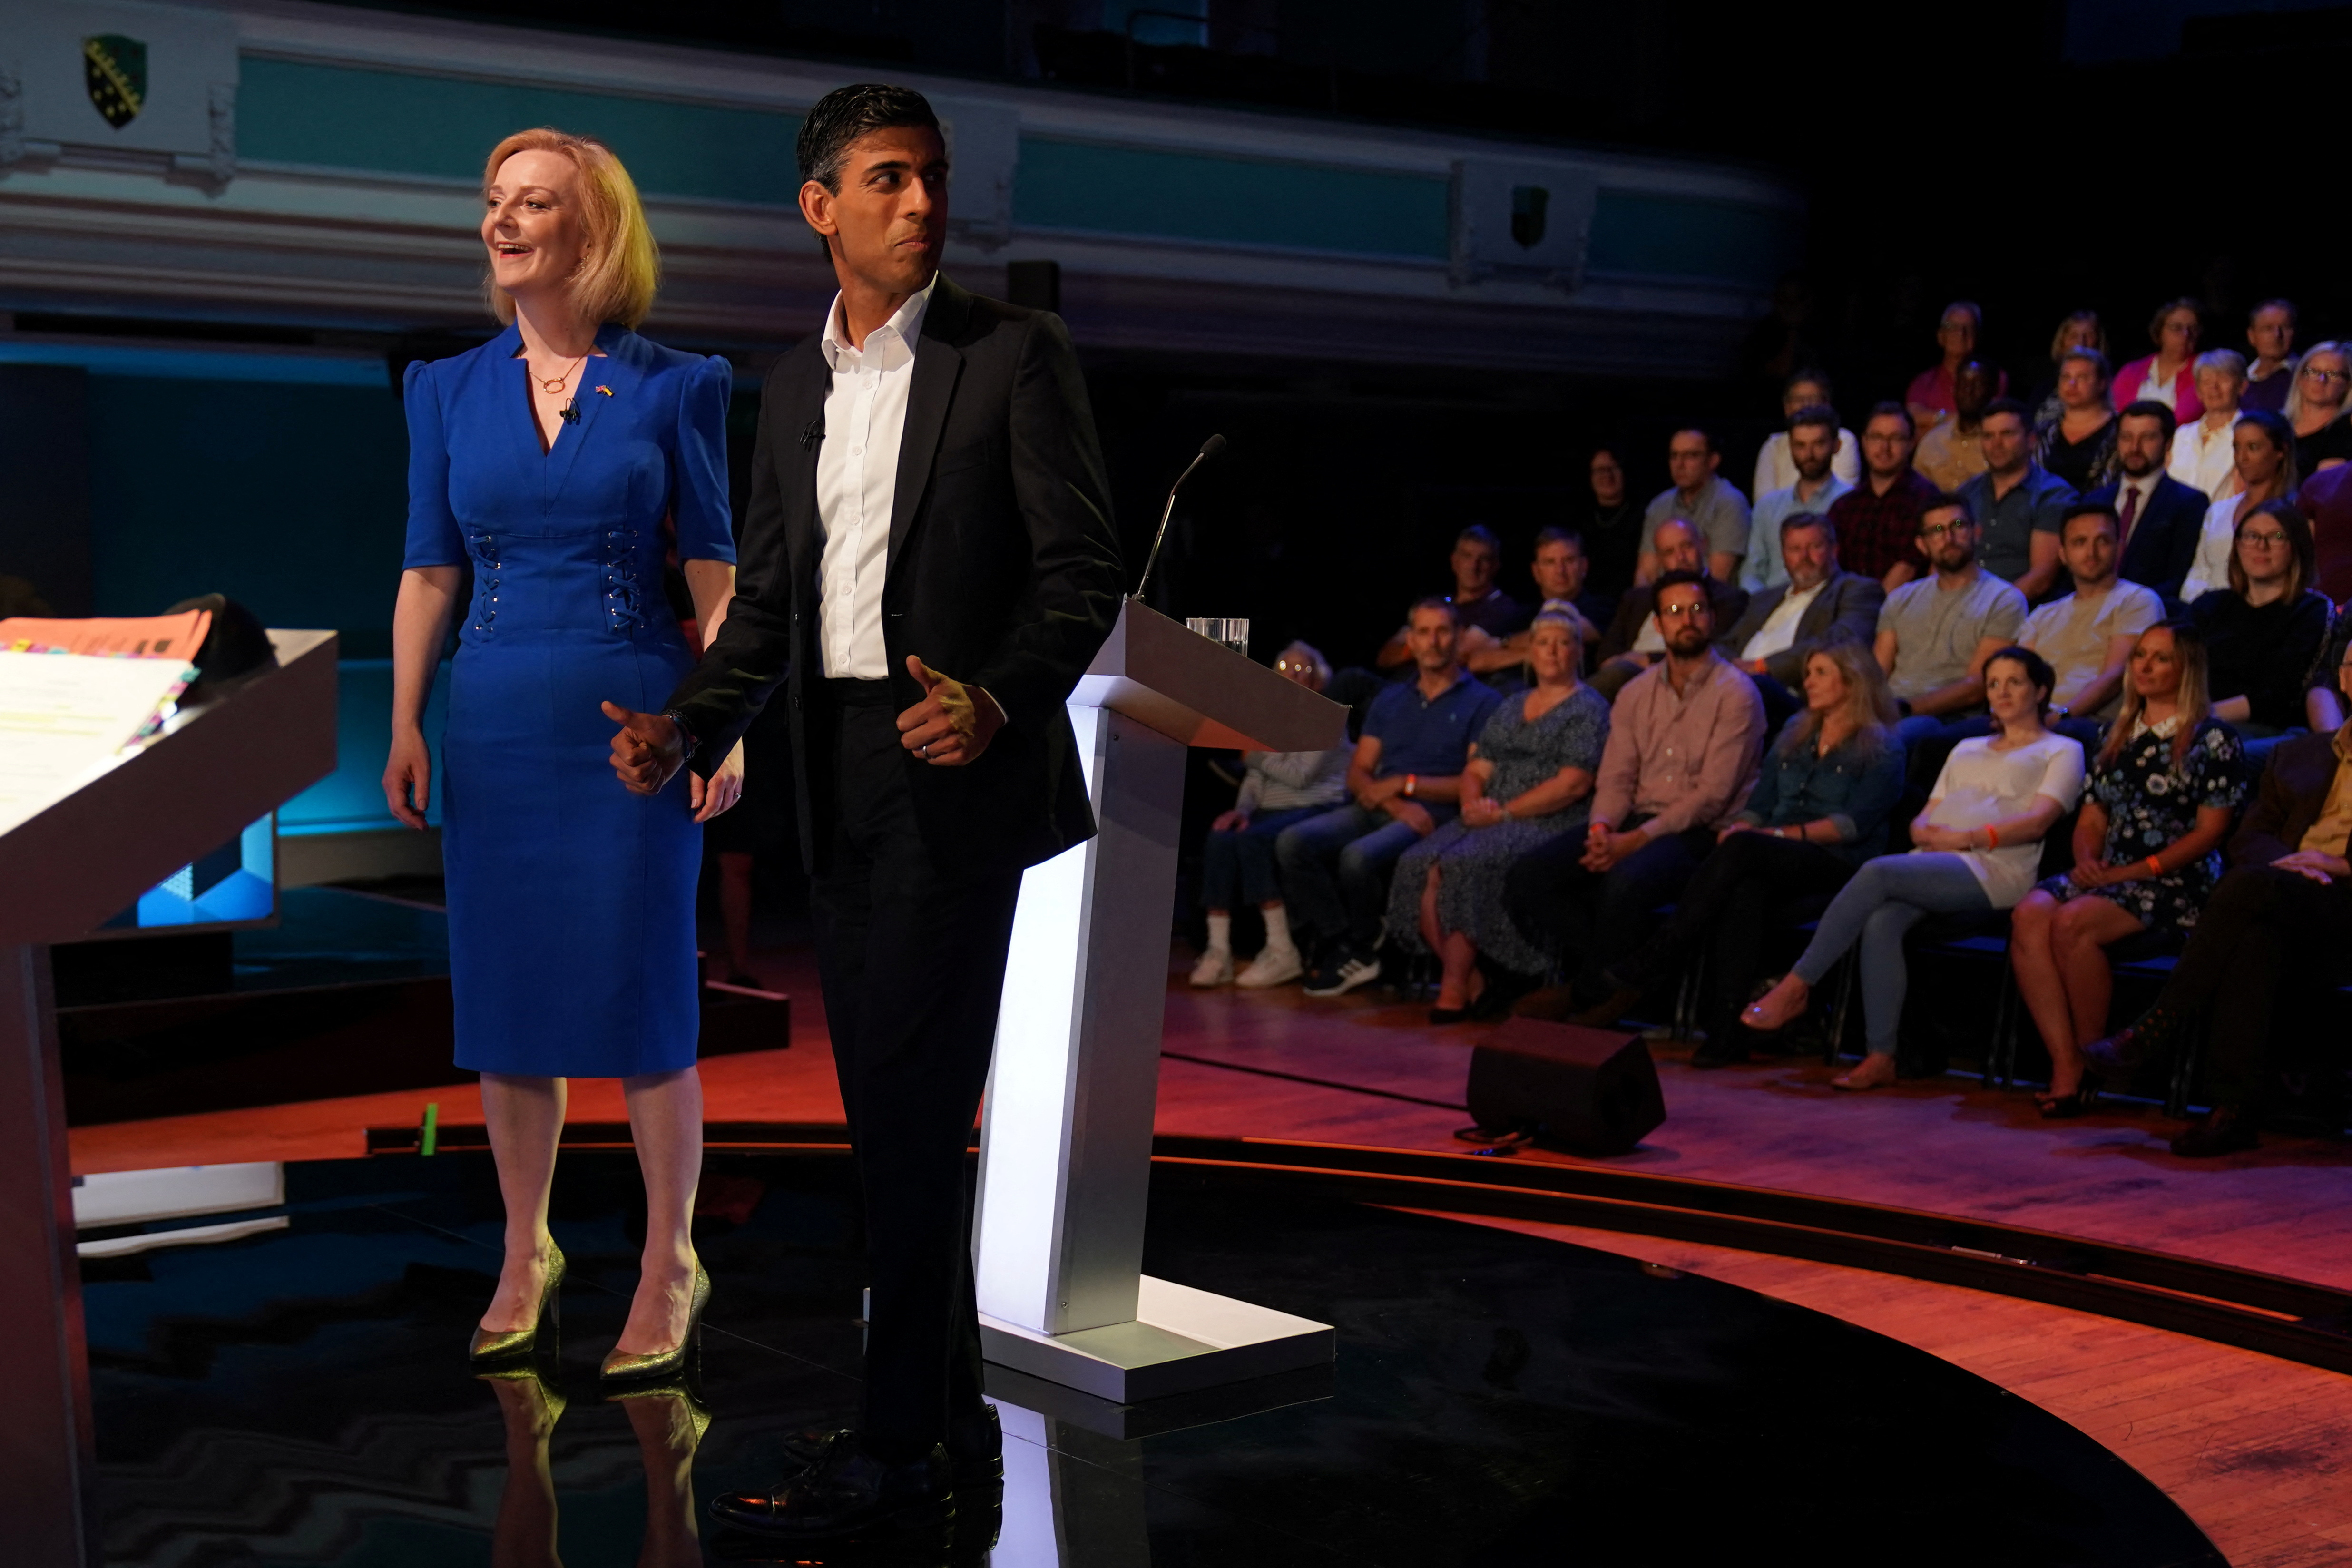 Britain's Conservative party leadership debate in Stoke-on-Trent